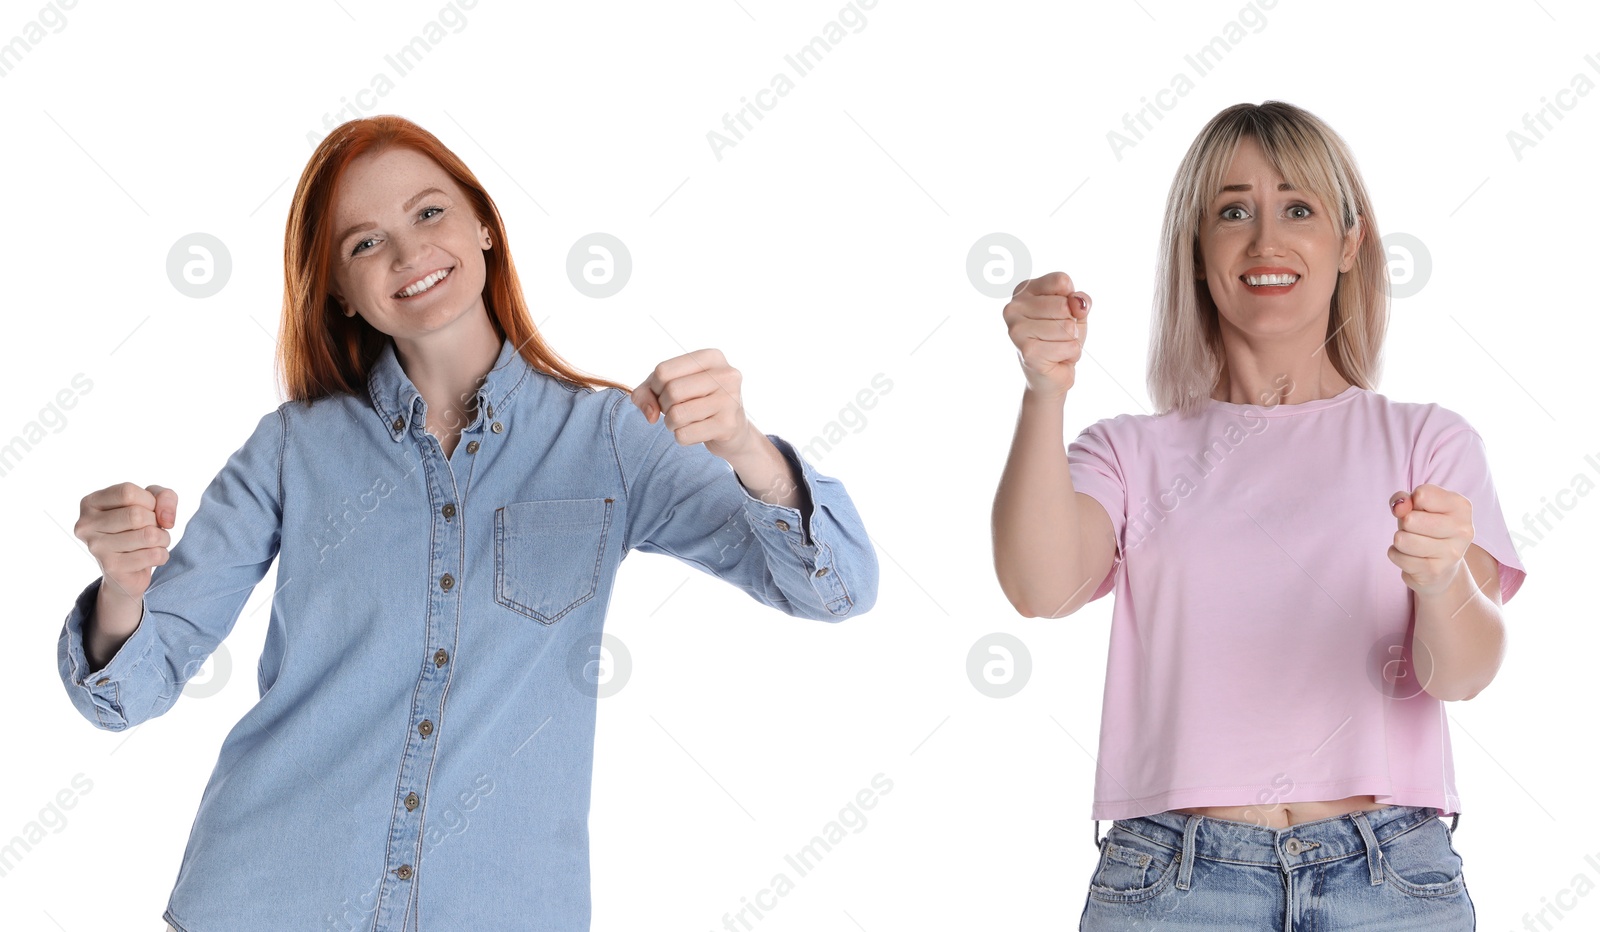 Image of Emotional women pretending to drive car on white background, collage. Banner design